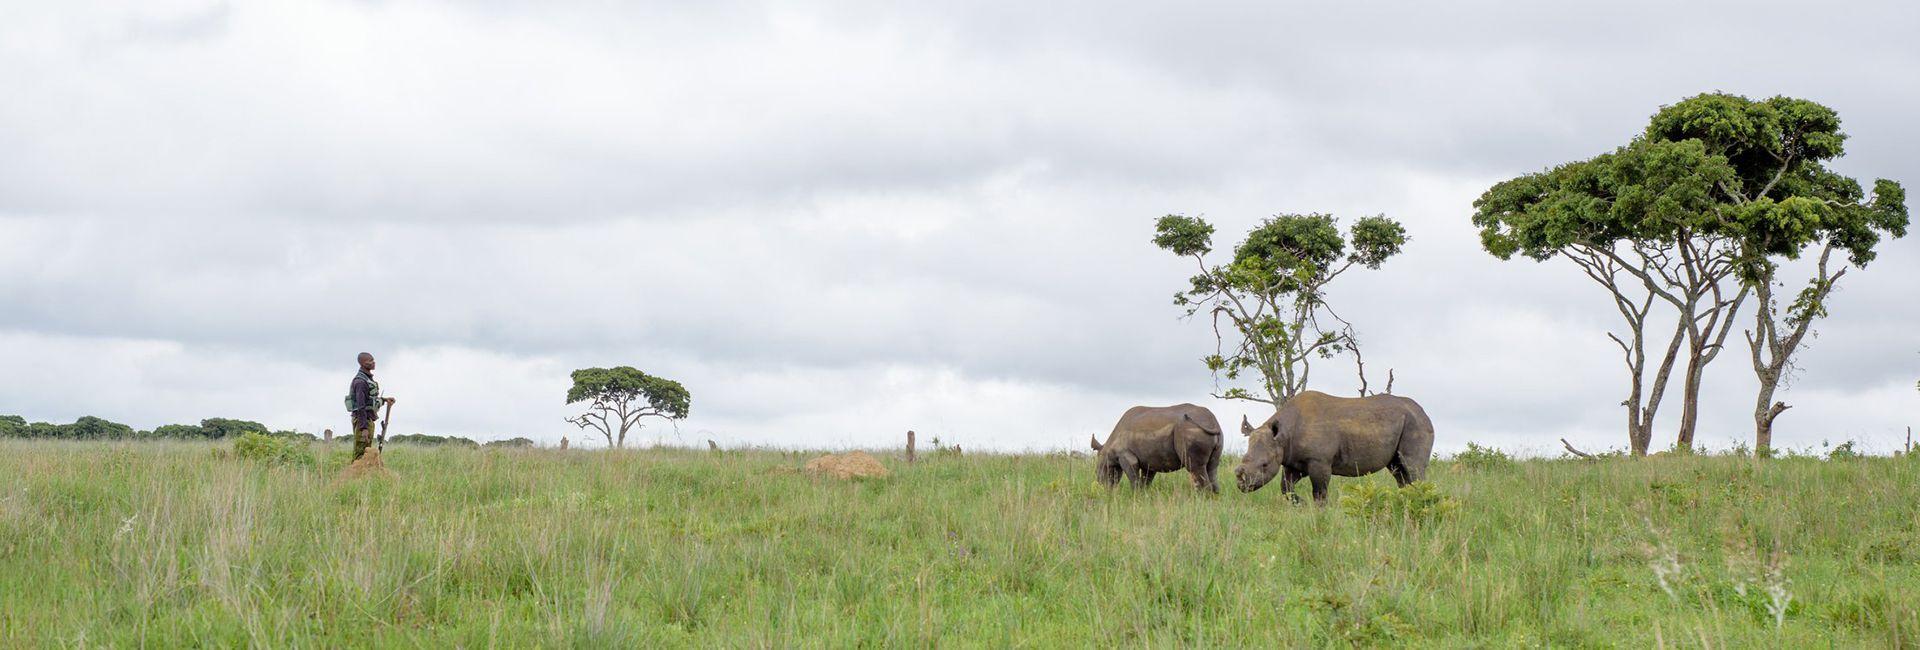 Check Out The Latest Rhino and Elephant Conservation Project Volunteer Reviews!